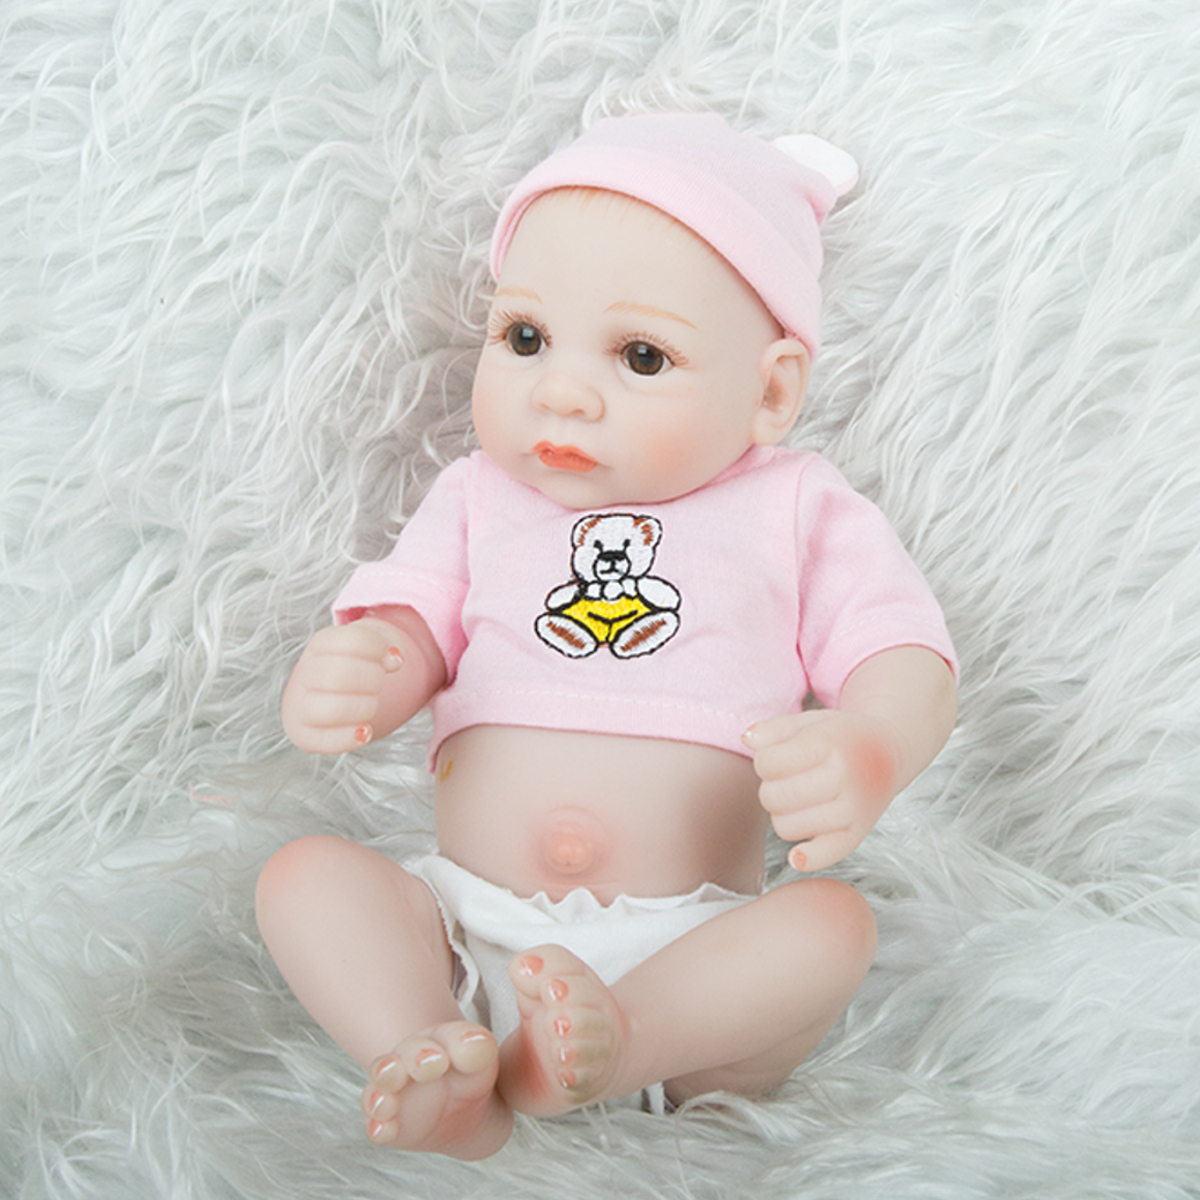 28CM-Silicone-Realistic-Sleeping-Reborns-Lifelike-Newborn-Baby-Doll-Toy-with-Moveable-Head-Arms-And--1817558-8